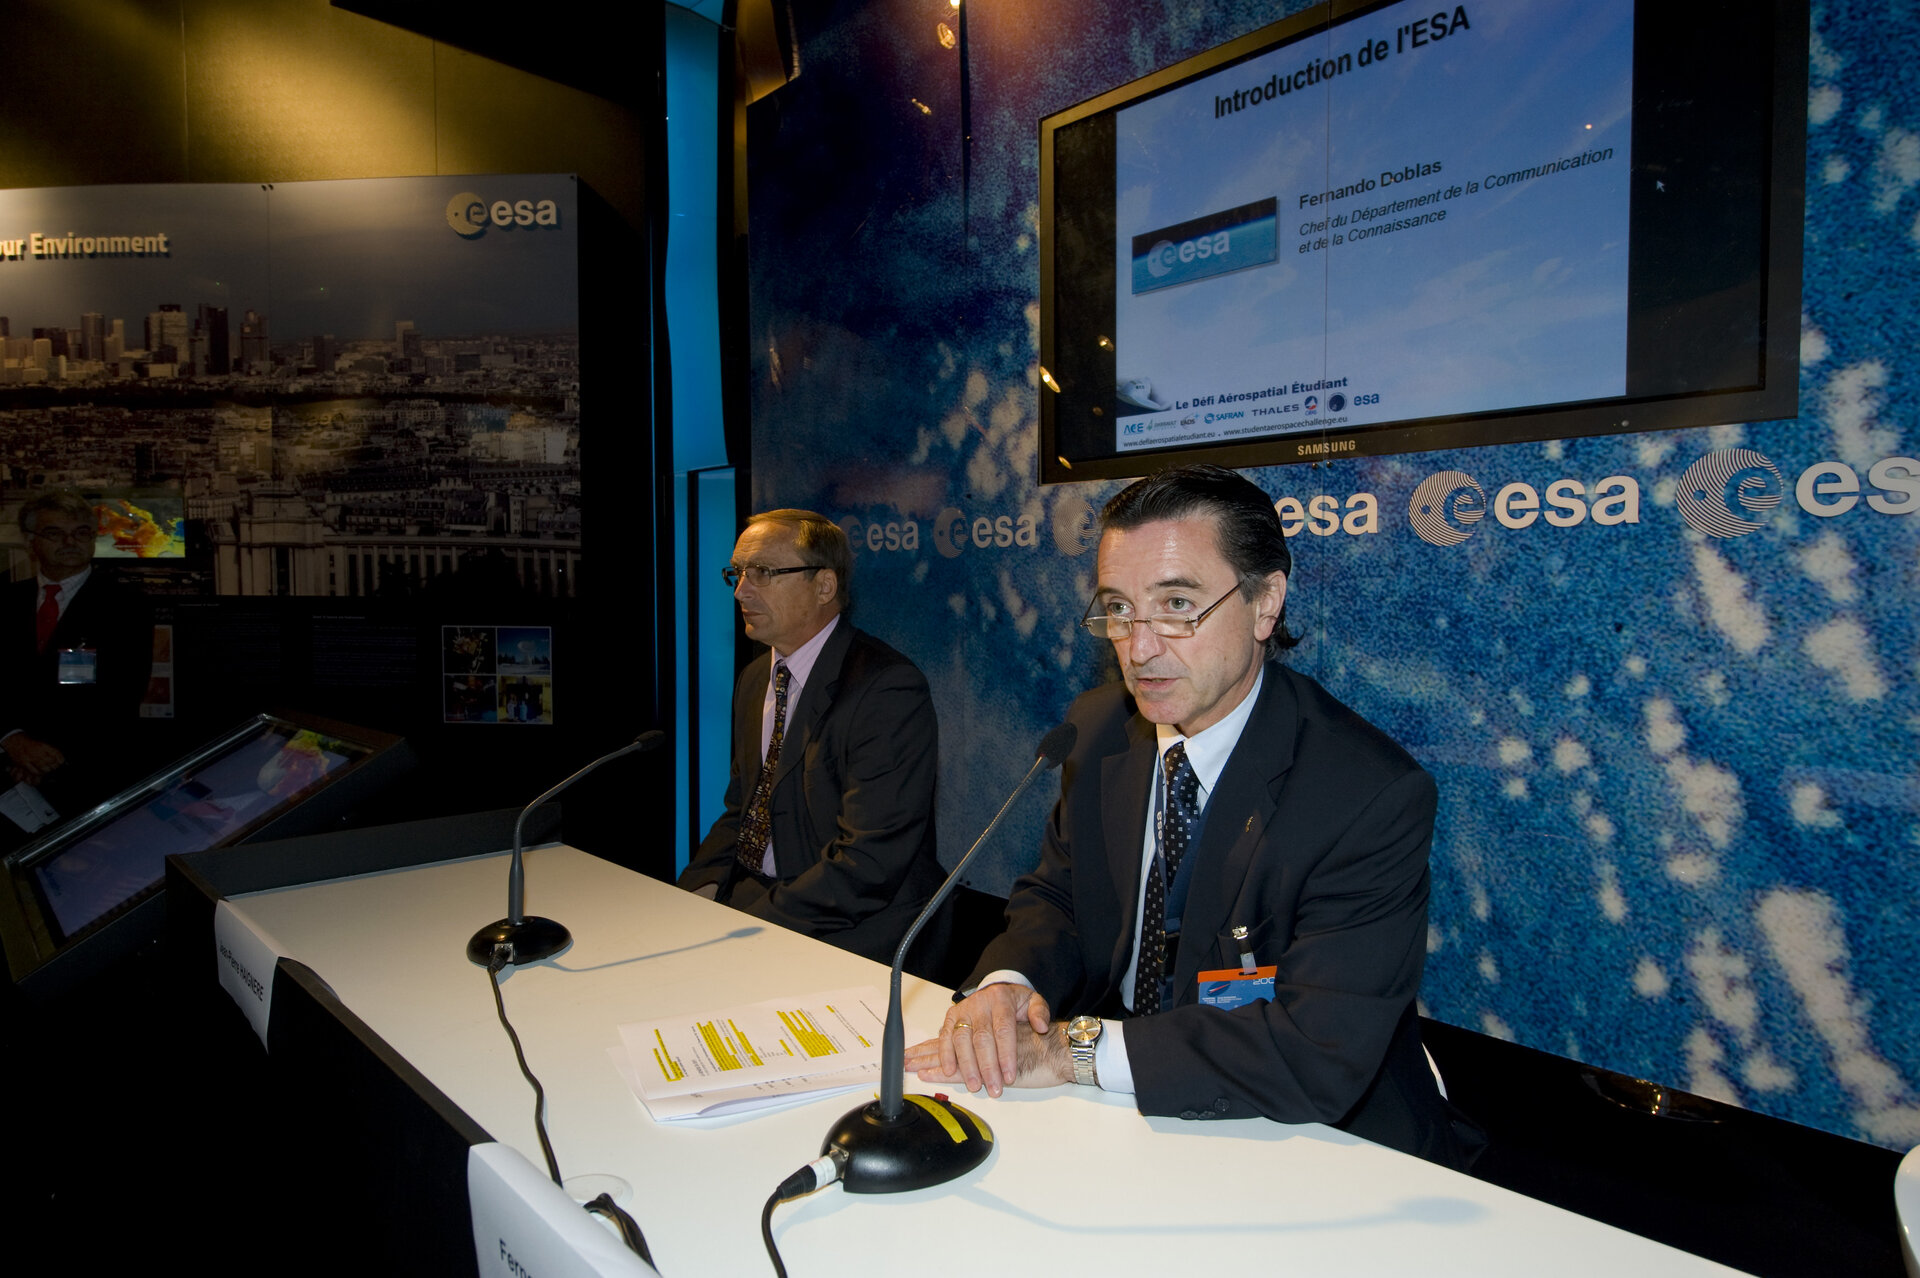 Jean-Pierre Haigneré and Fernando Doblas announce the results of the third edition of the Student Aerospace Challenge